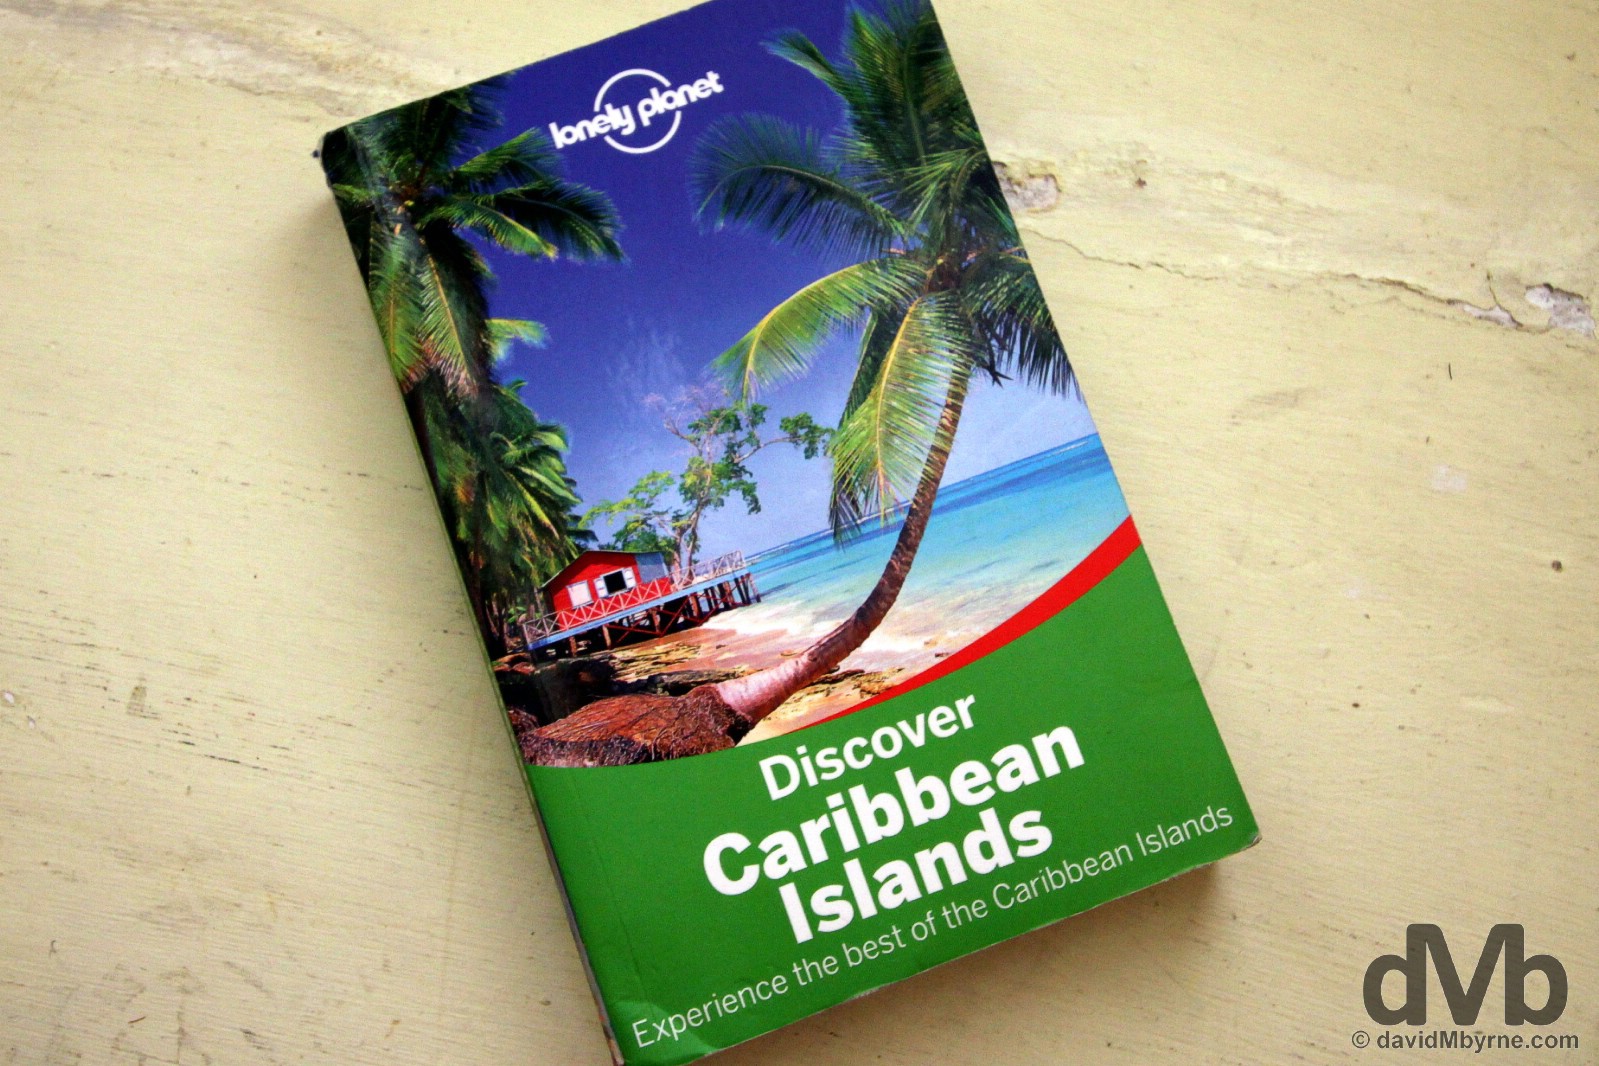 The Caribbean was great, not that this had anything to do with it. Lonely Planet's Discover Caribbean Islands. The worst Lonely Planet publication I've yet used. It wasn't long after I started my jaunt through the region that this was resigned to the bottom of my backpack, where it stayed until it reappeared for this picture. I could have done without its weight & certainly could have done without it's next-to-useless content.